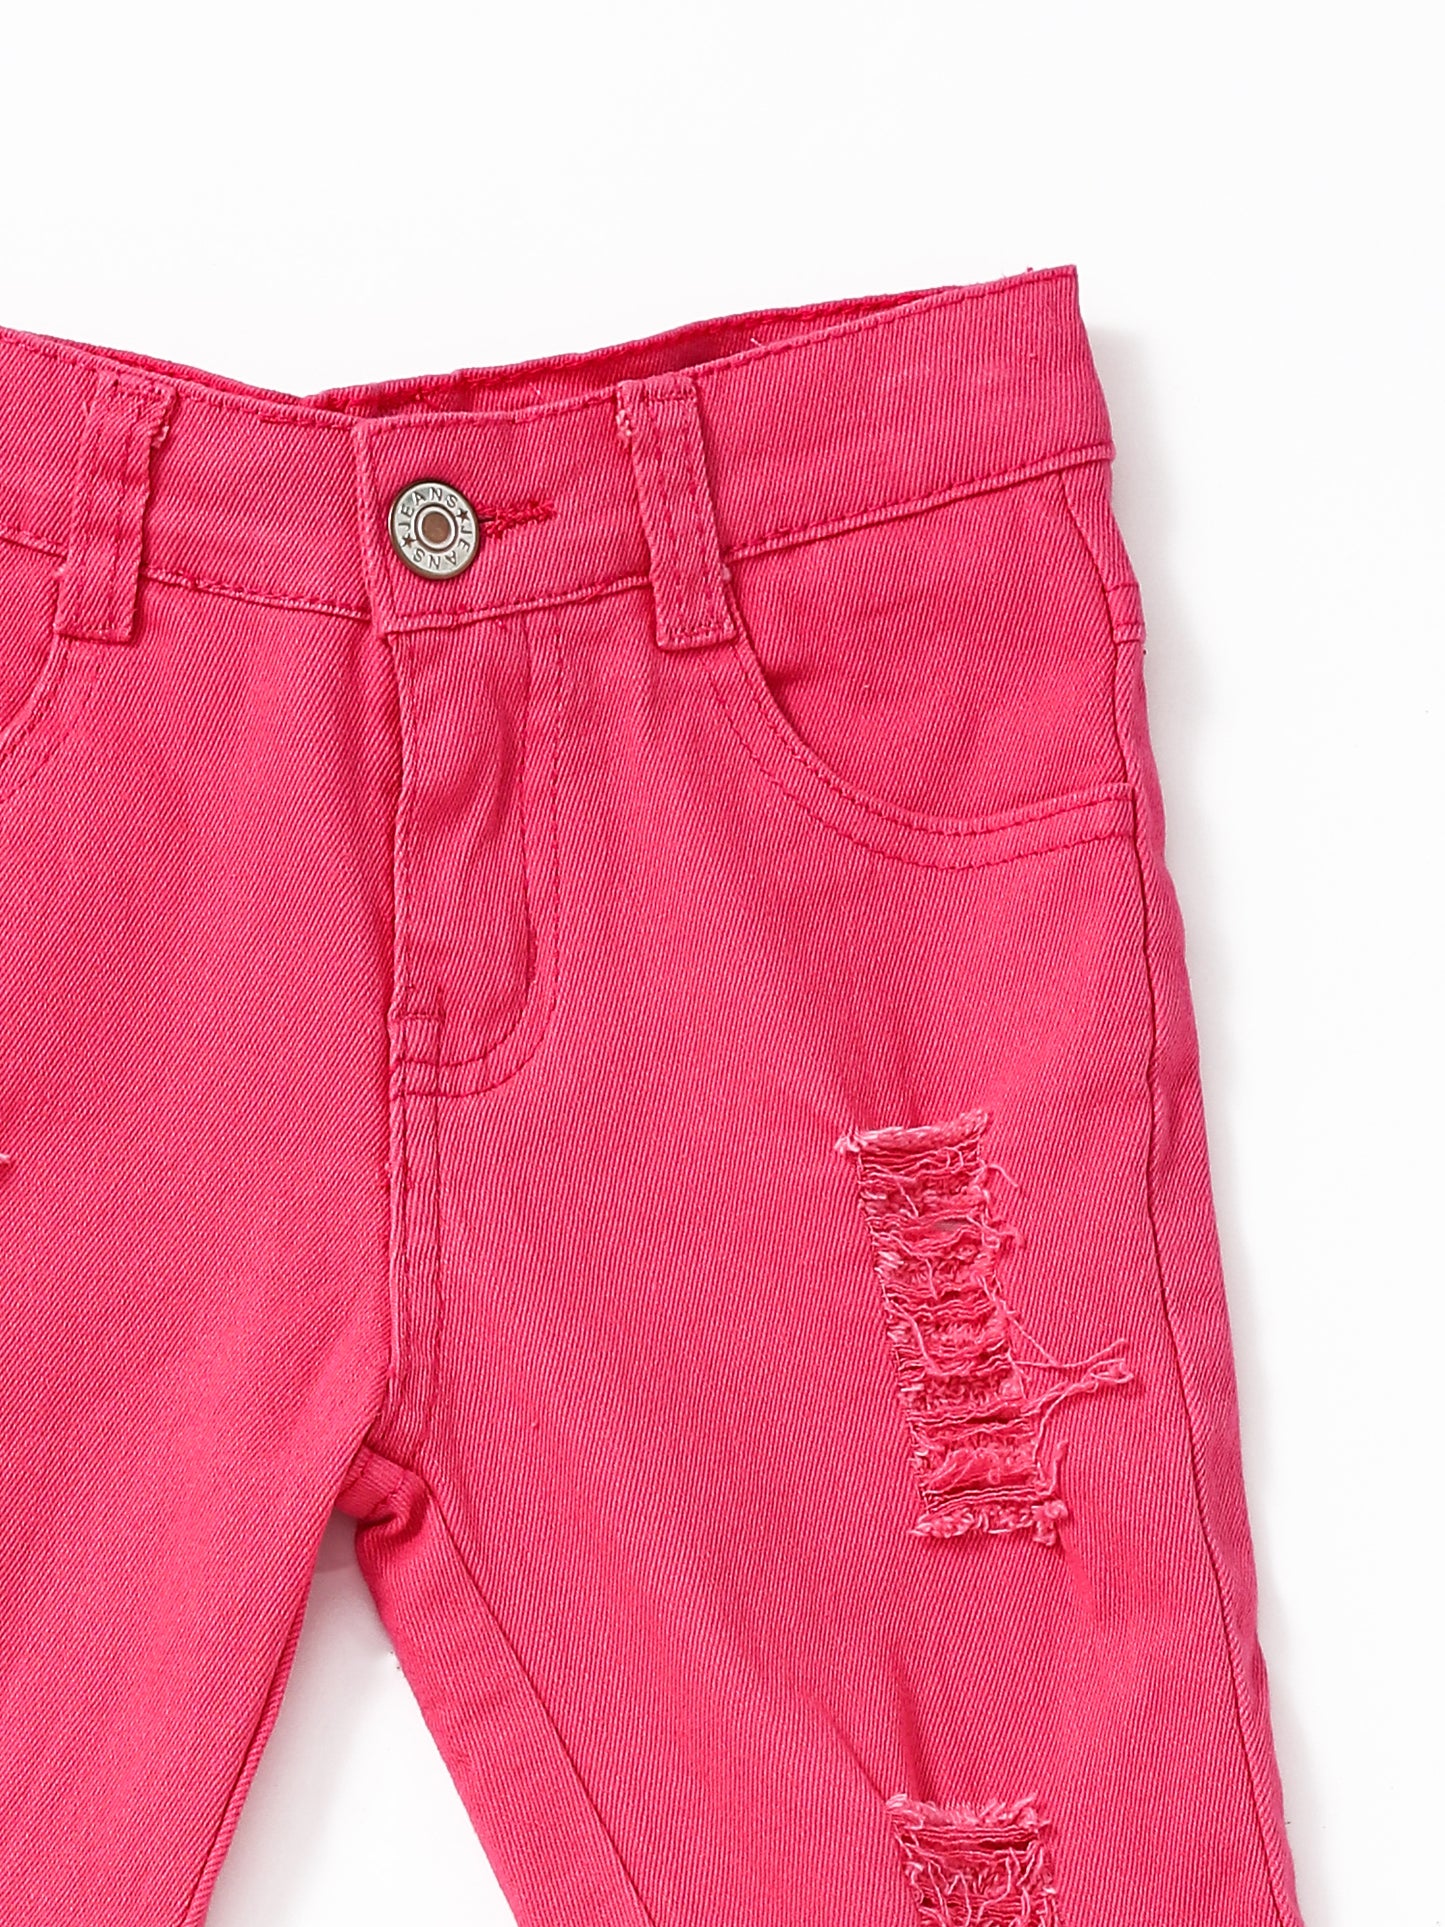 Hot Pink Double Layer Girls Jeans